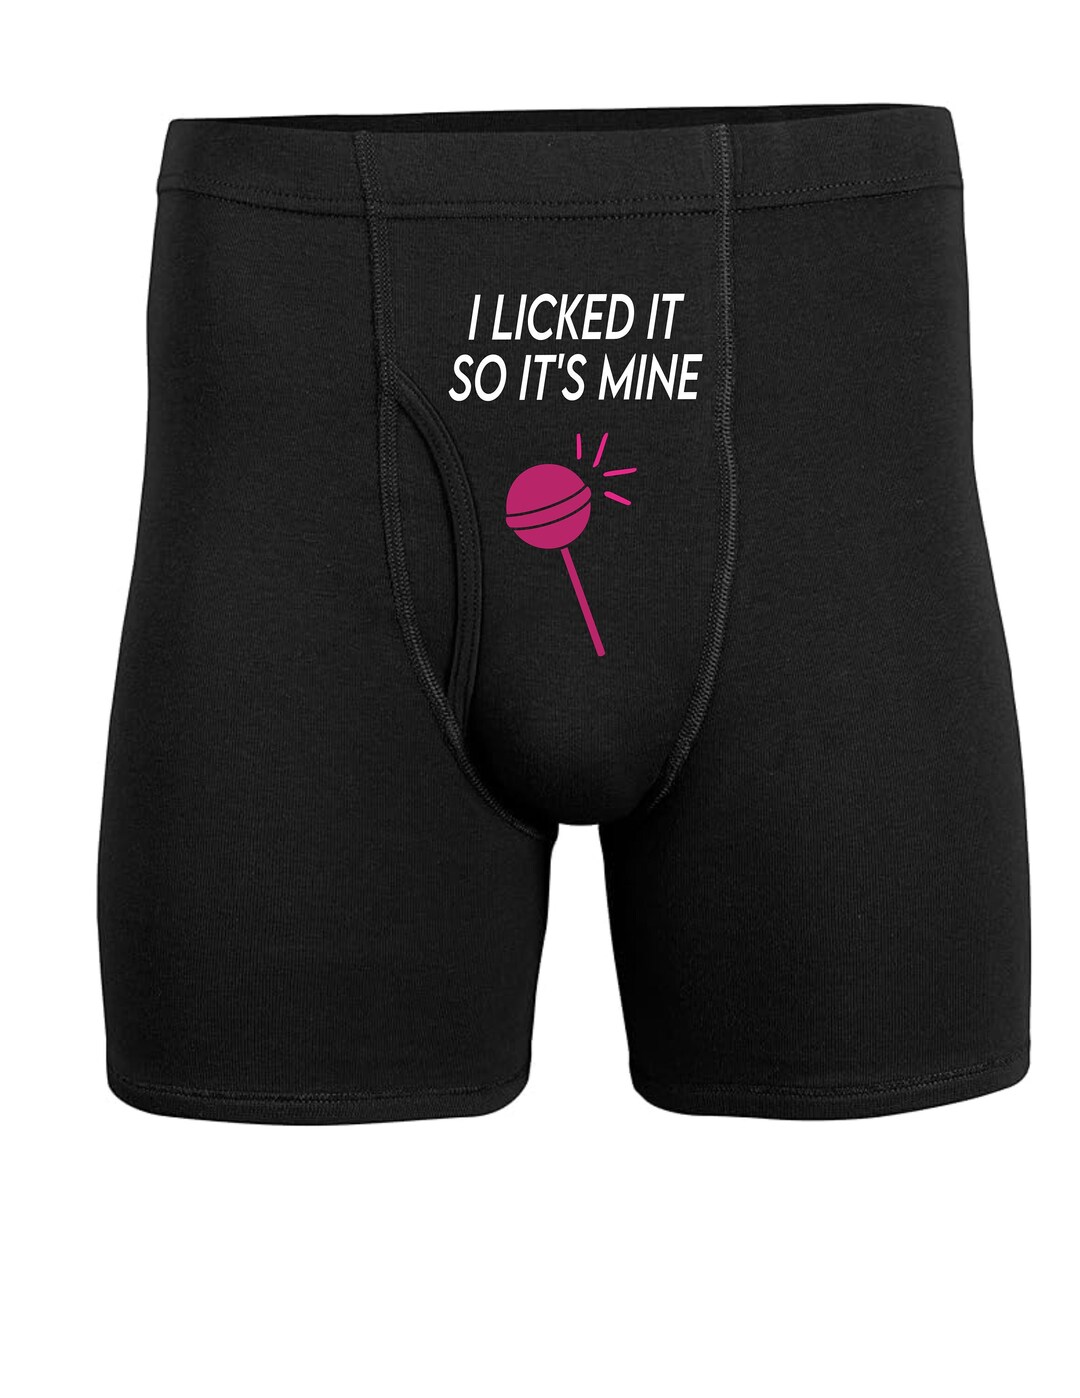 I Licked It so Its Mine Mens Boxers Gifts, Naughty Husband/boyfriend ...